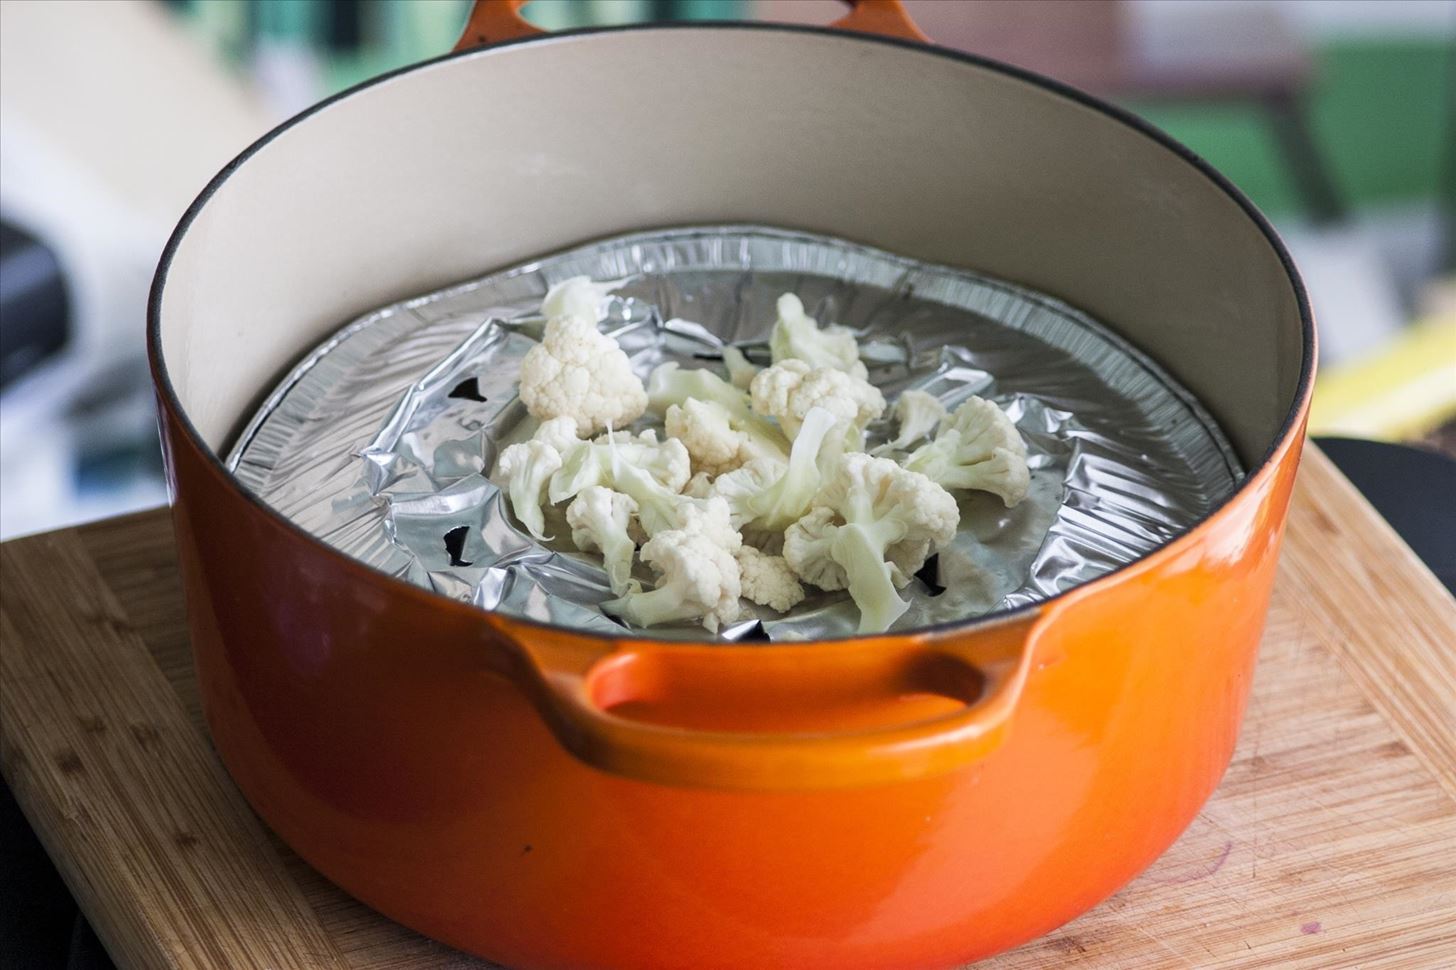 How to Steam Food Without a Steamer Basket